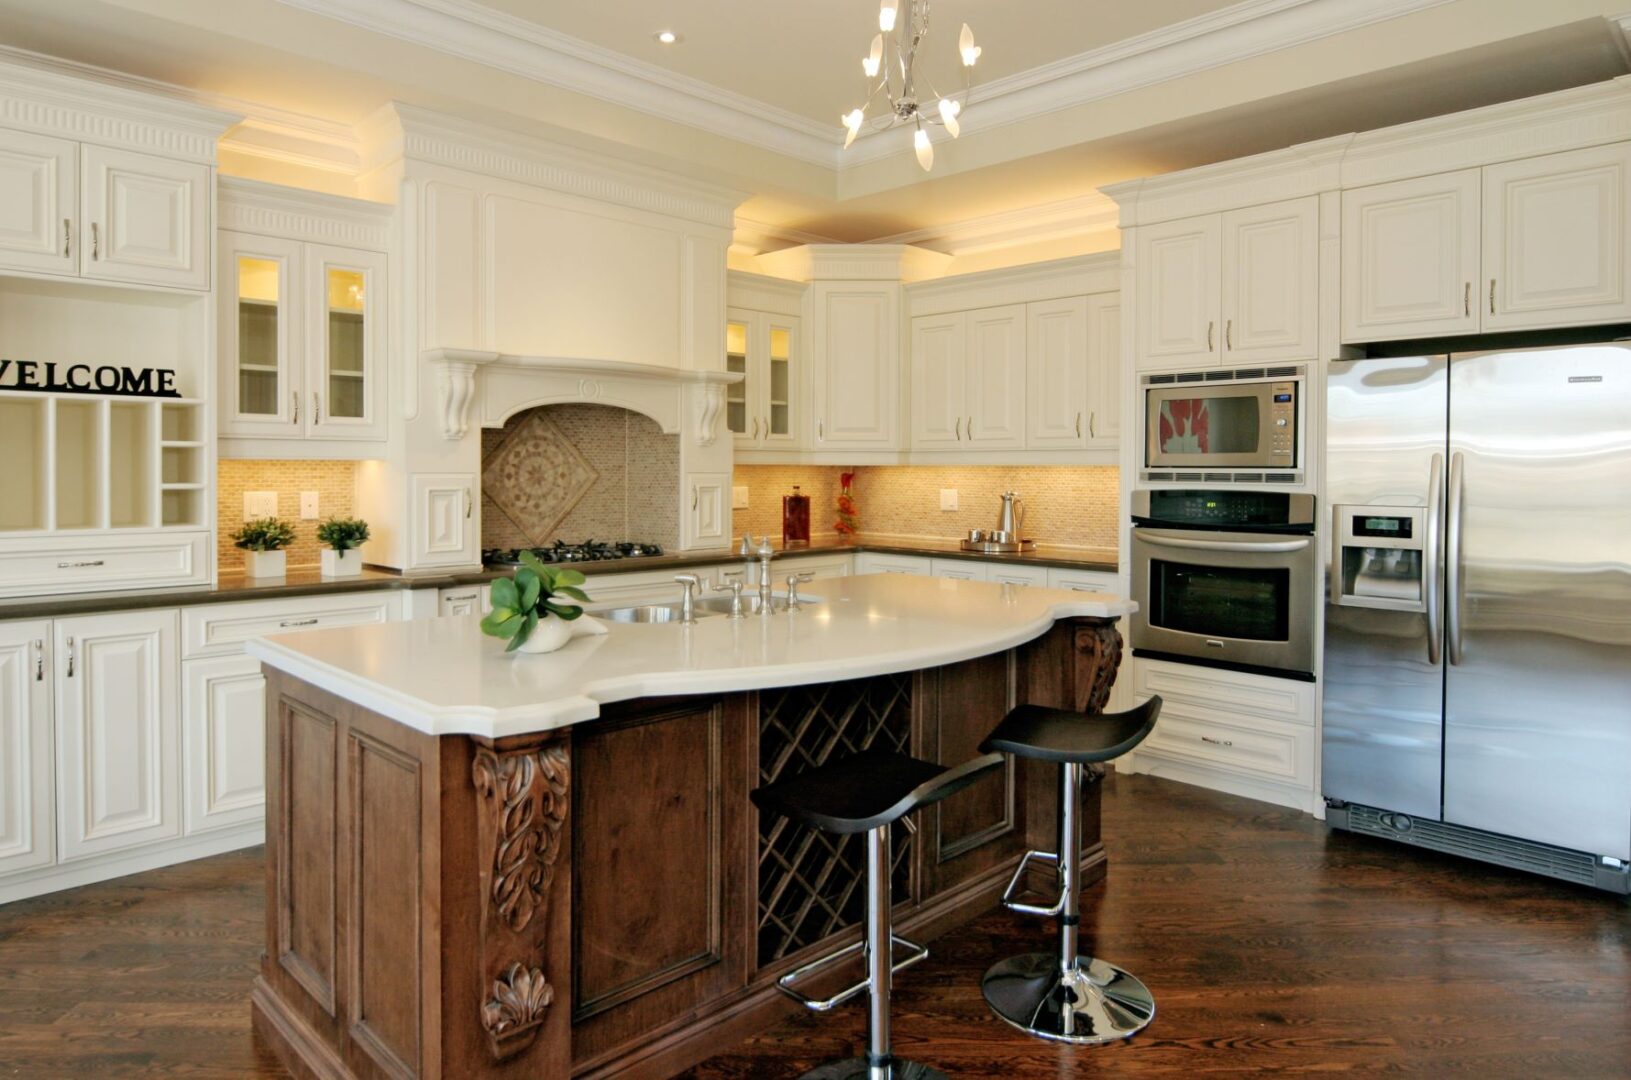 A Kitchen Island With White Marble Counter